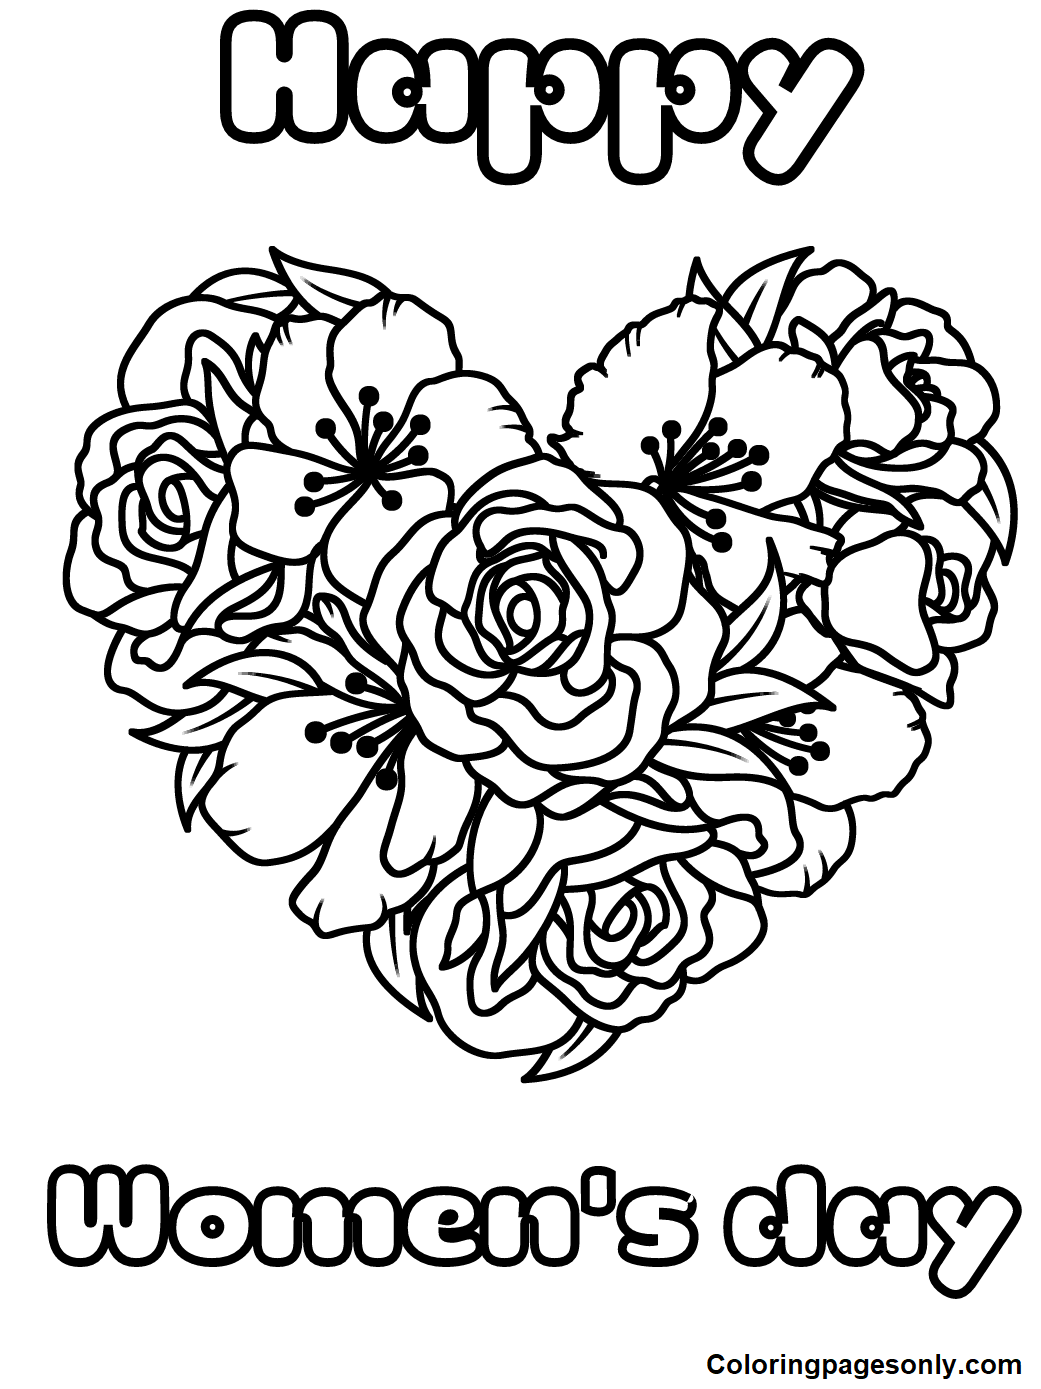 Women’s Day With Flowers Heart Coloring Pages